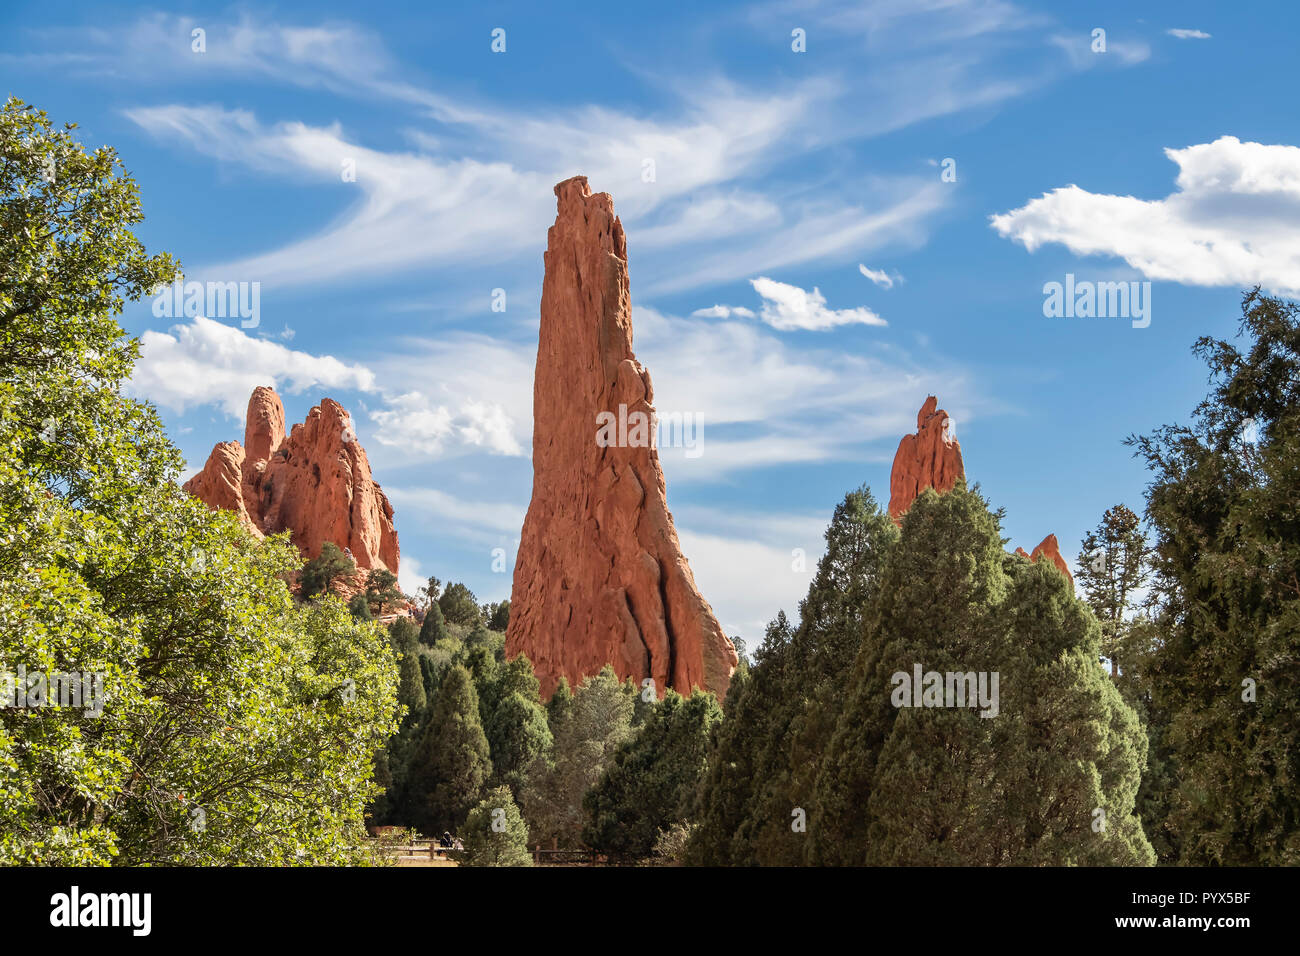 Towering red rock formations jut out of the ground to a height of 300 ft against a dramatic sky and surrounded by evergreen trees in the Garden of the Stock Photo